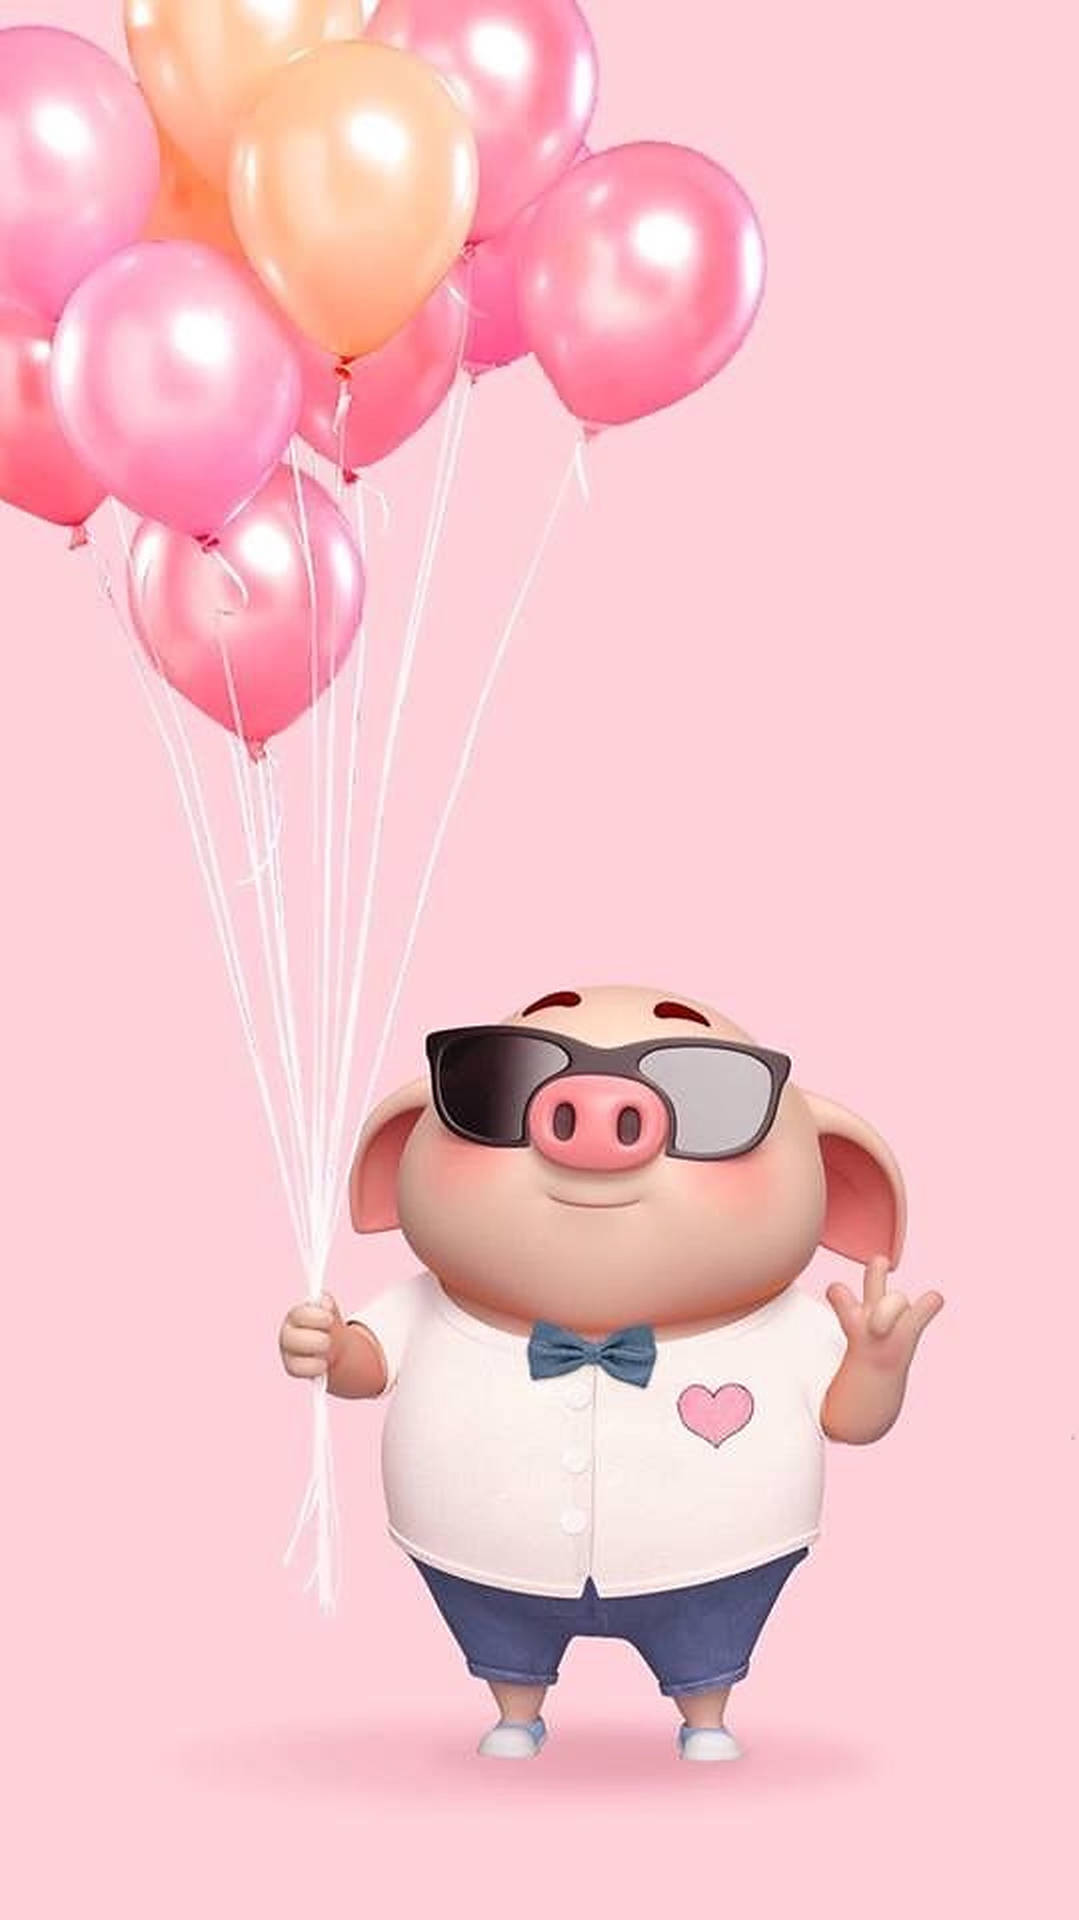 Cute Pig With Balloons Background